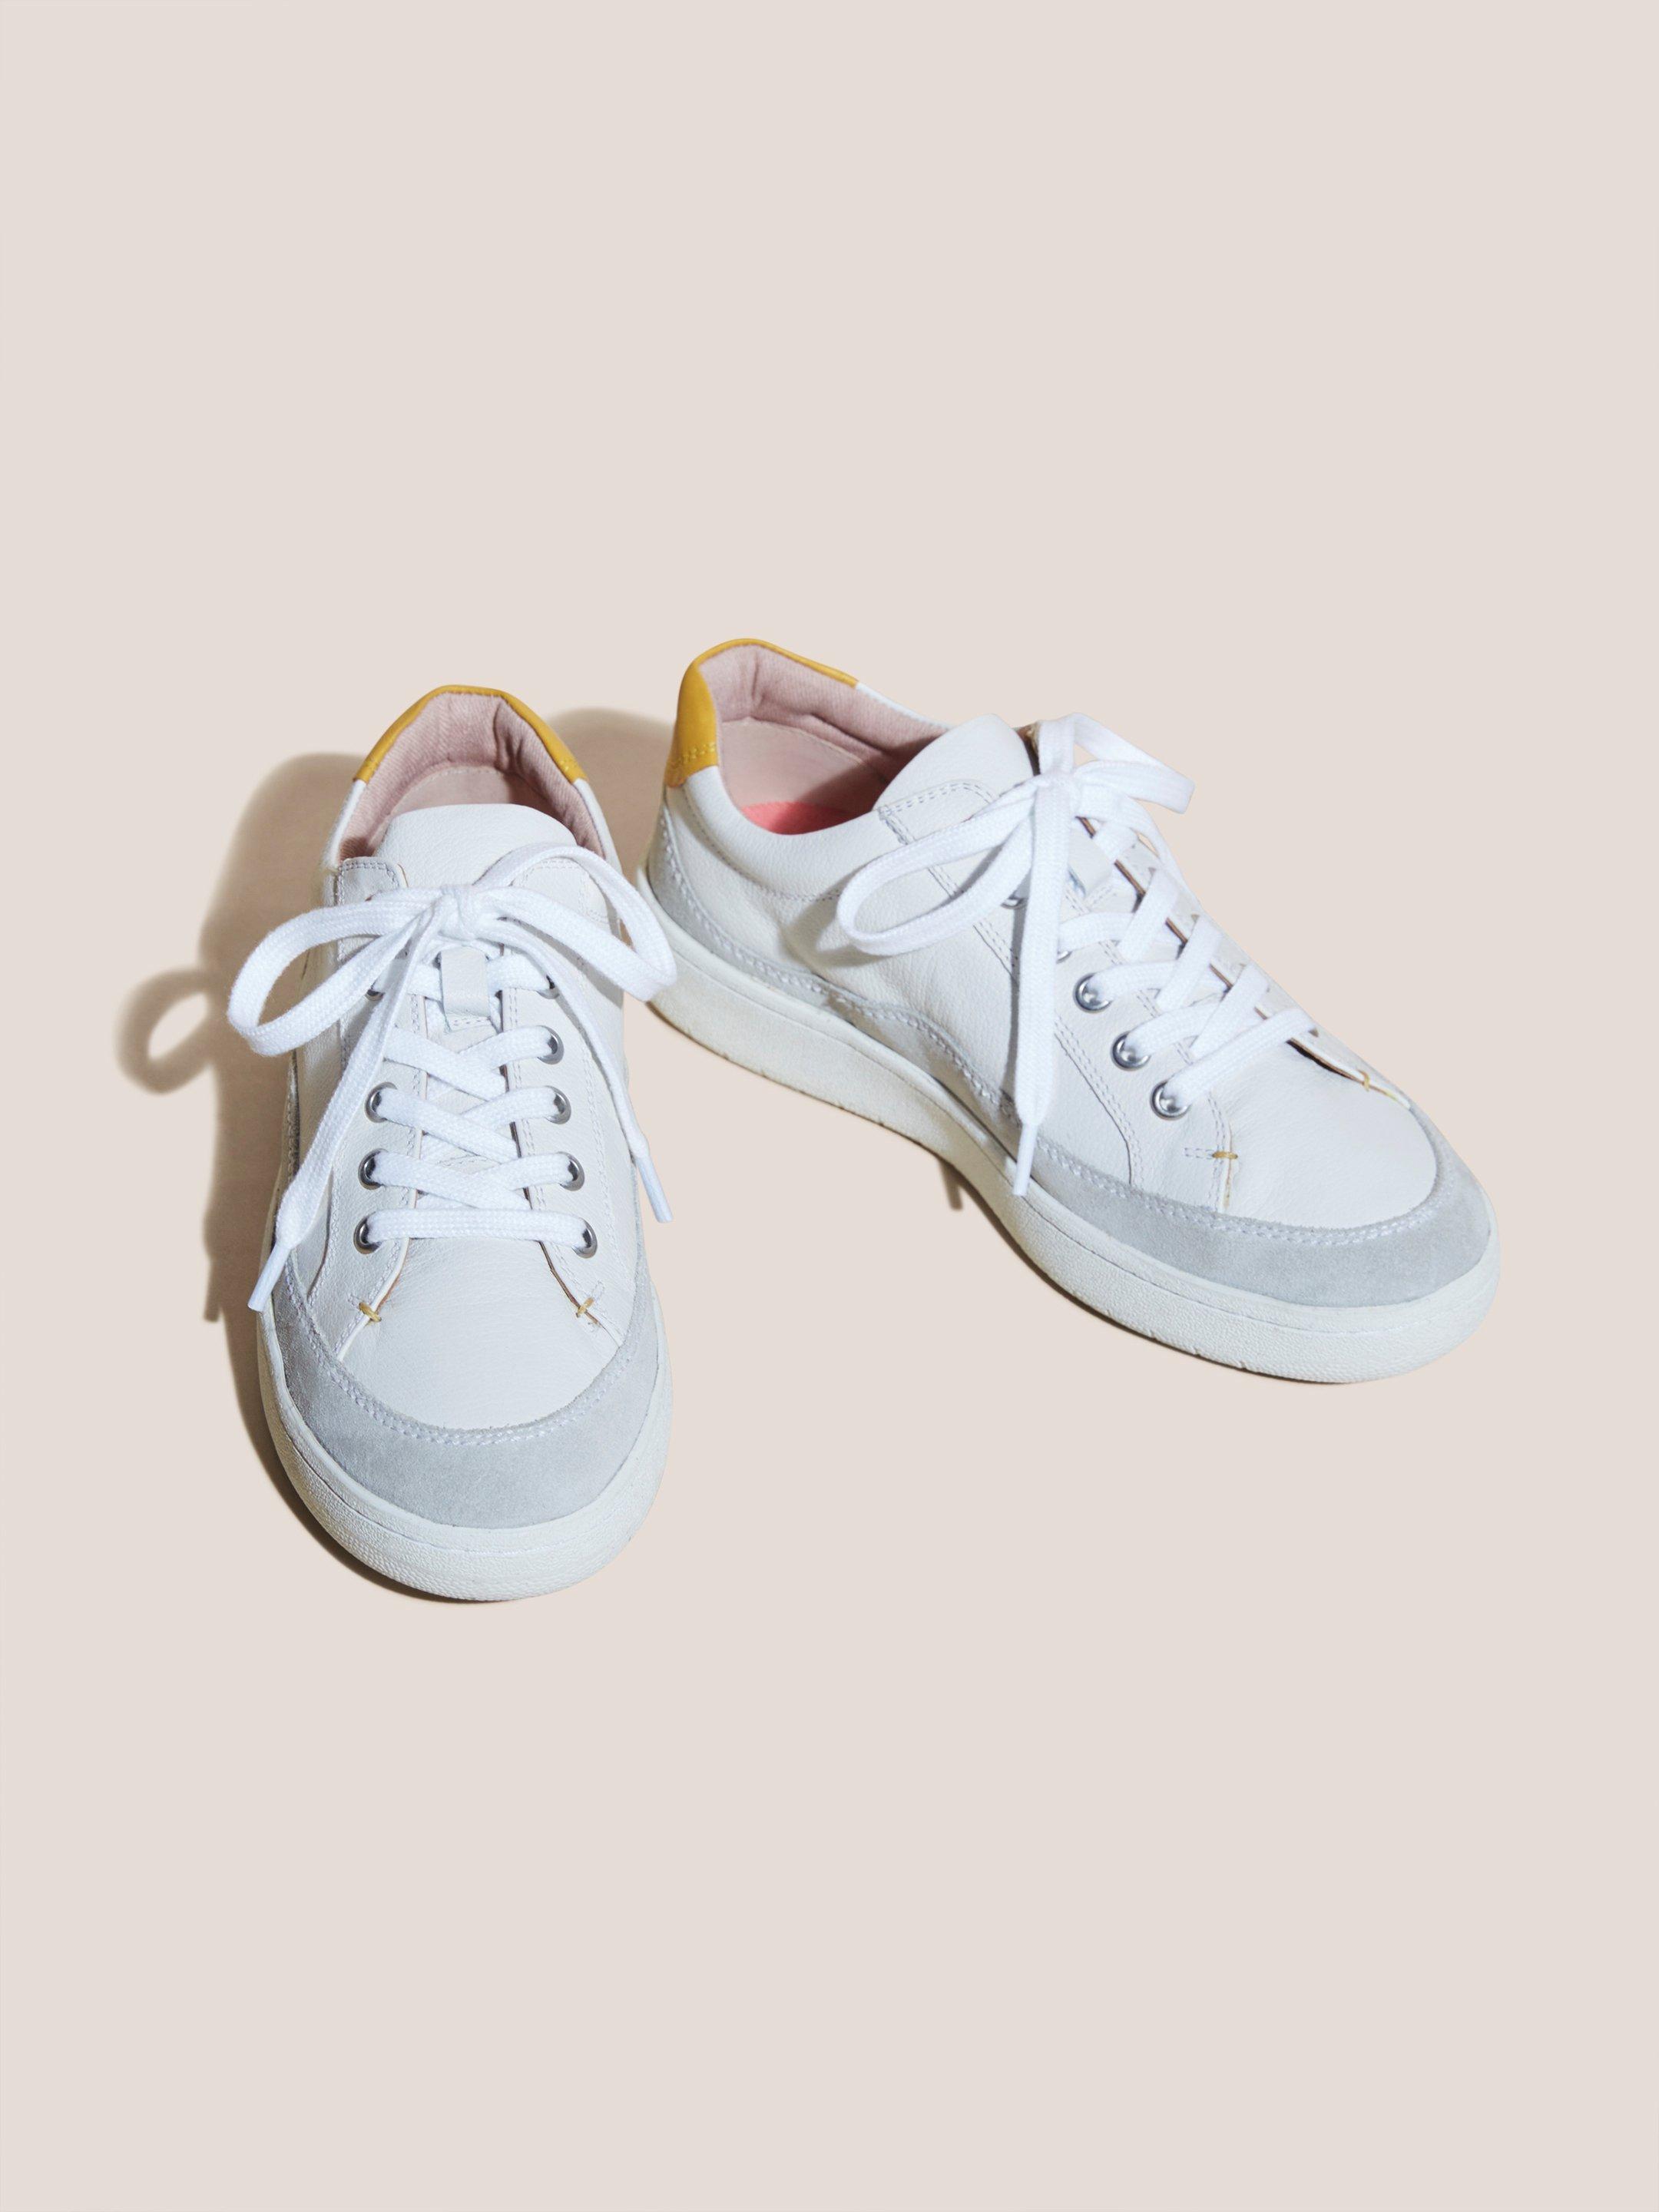 Tula Leather Lace Up Trainer in WHITE MLT - FLAT FRONT